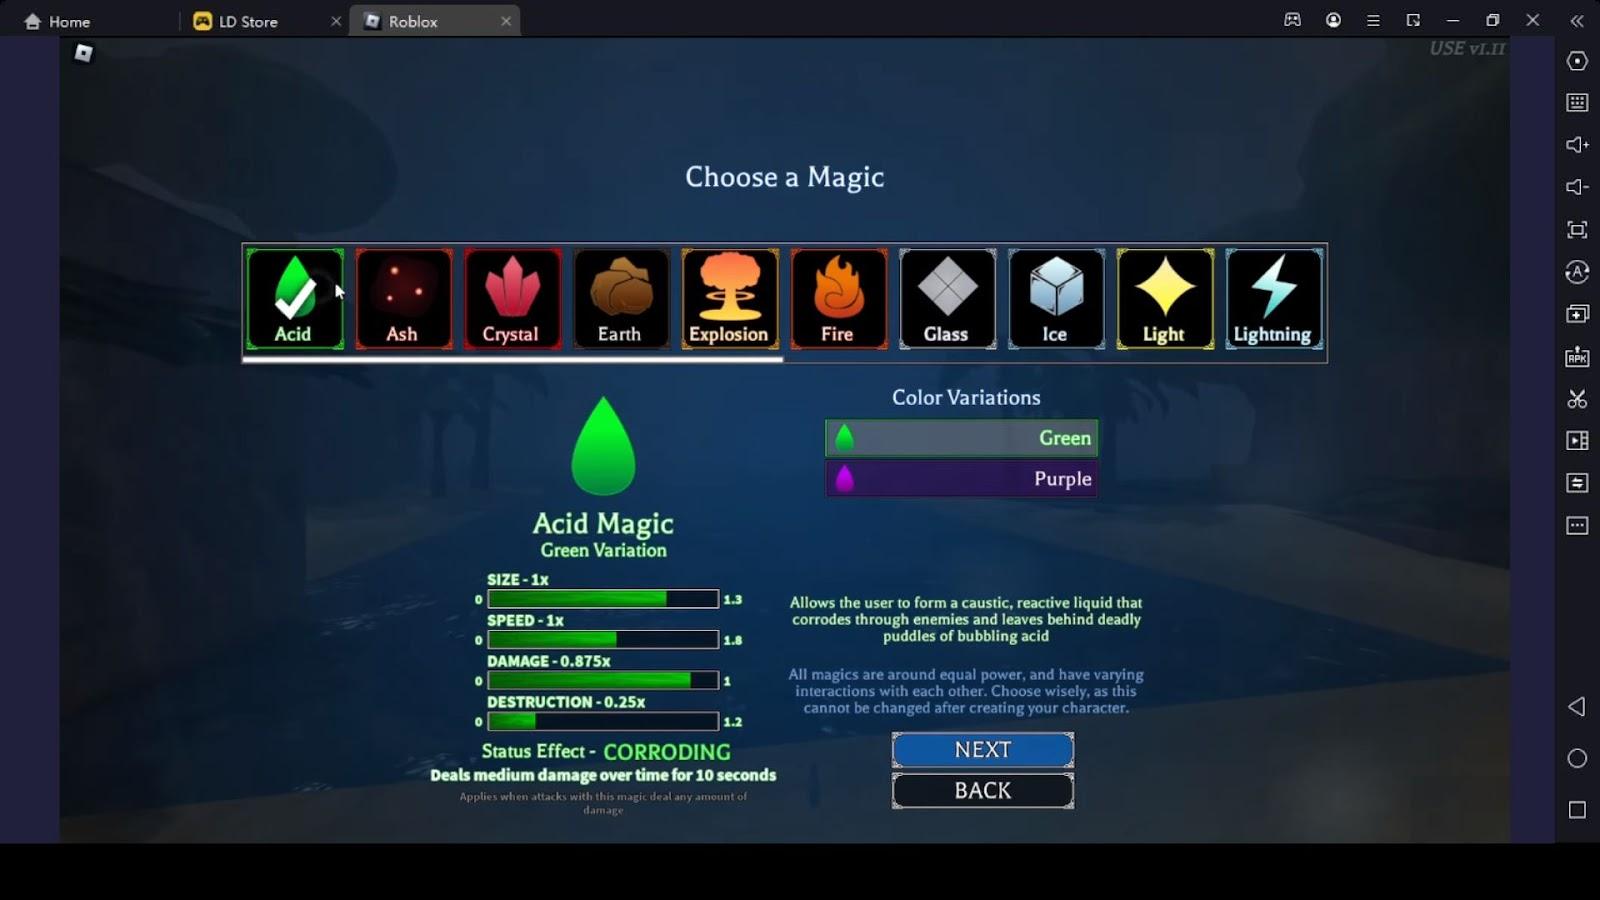 Arcane Odyssey - Complete Potions Guide - Item Level Gaming